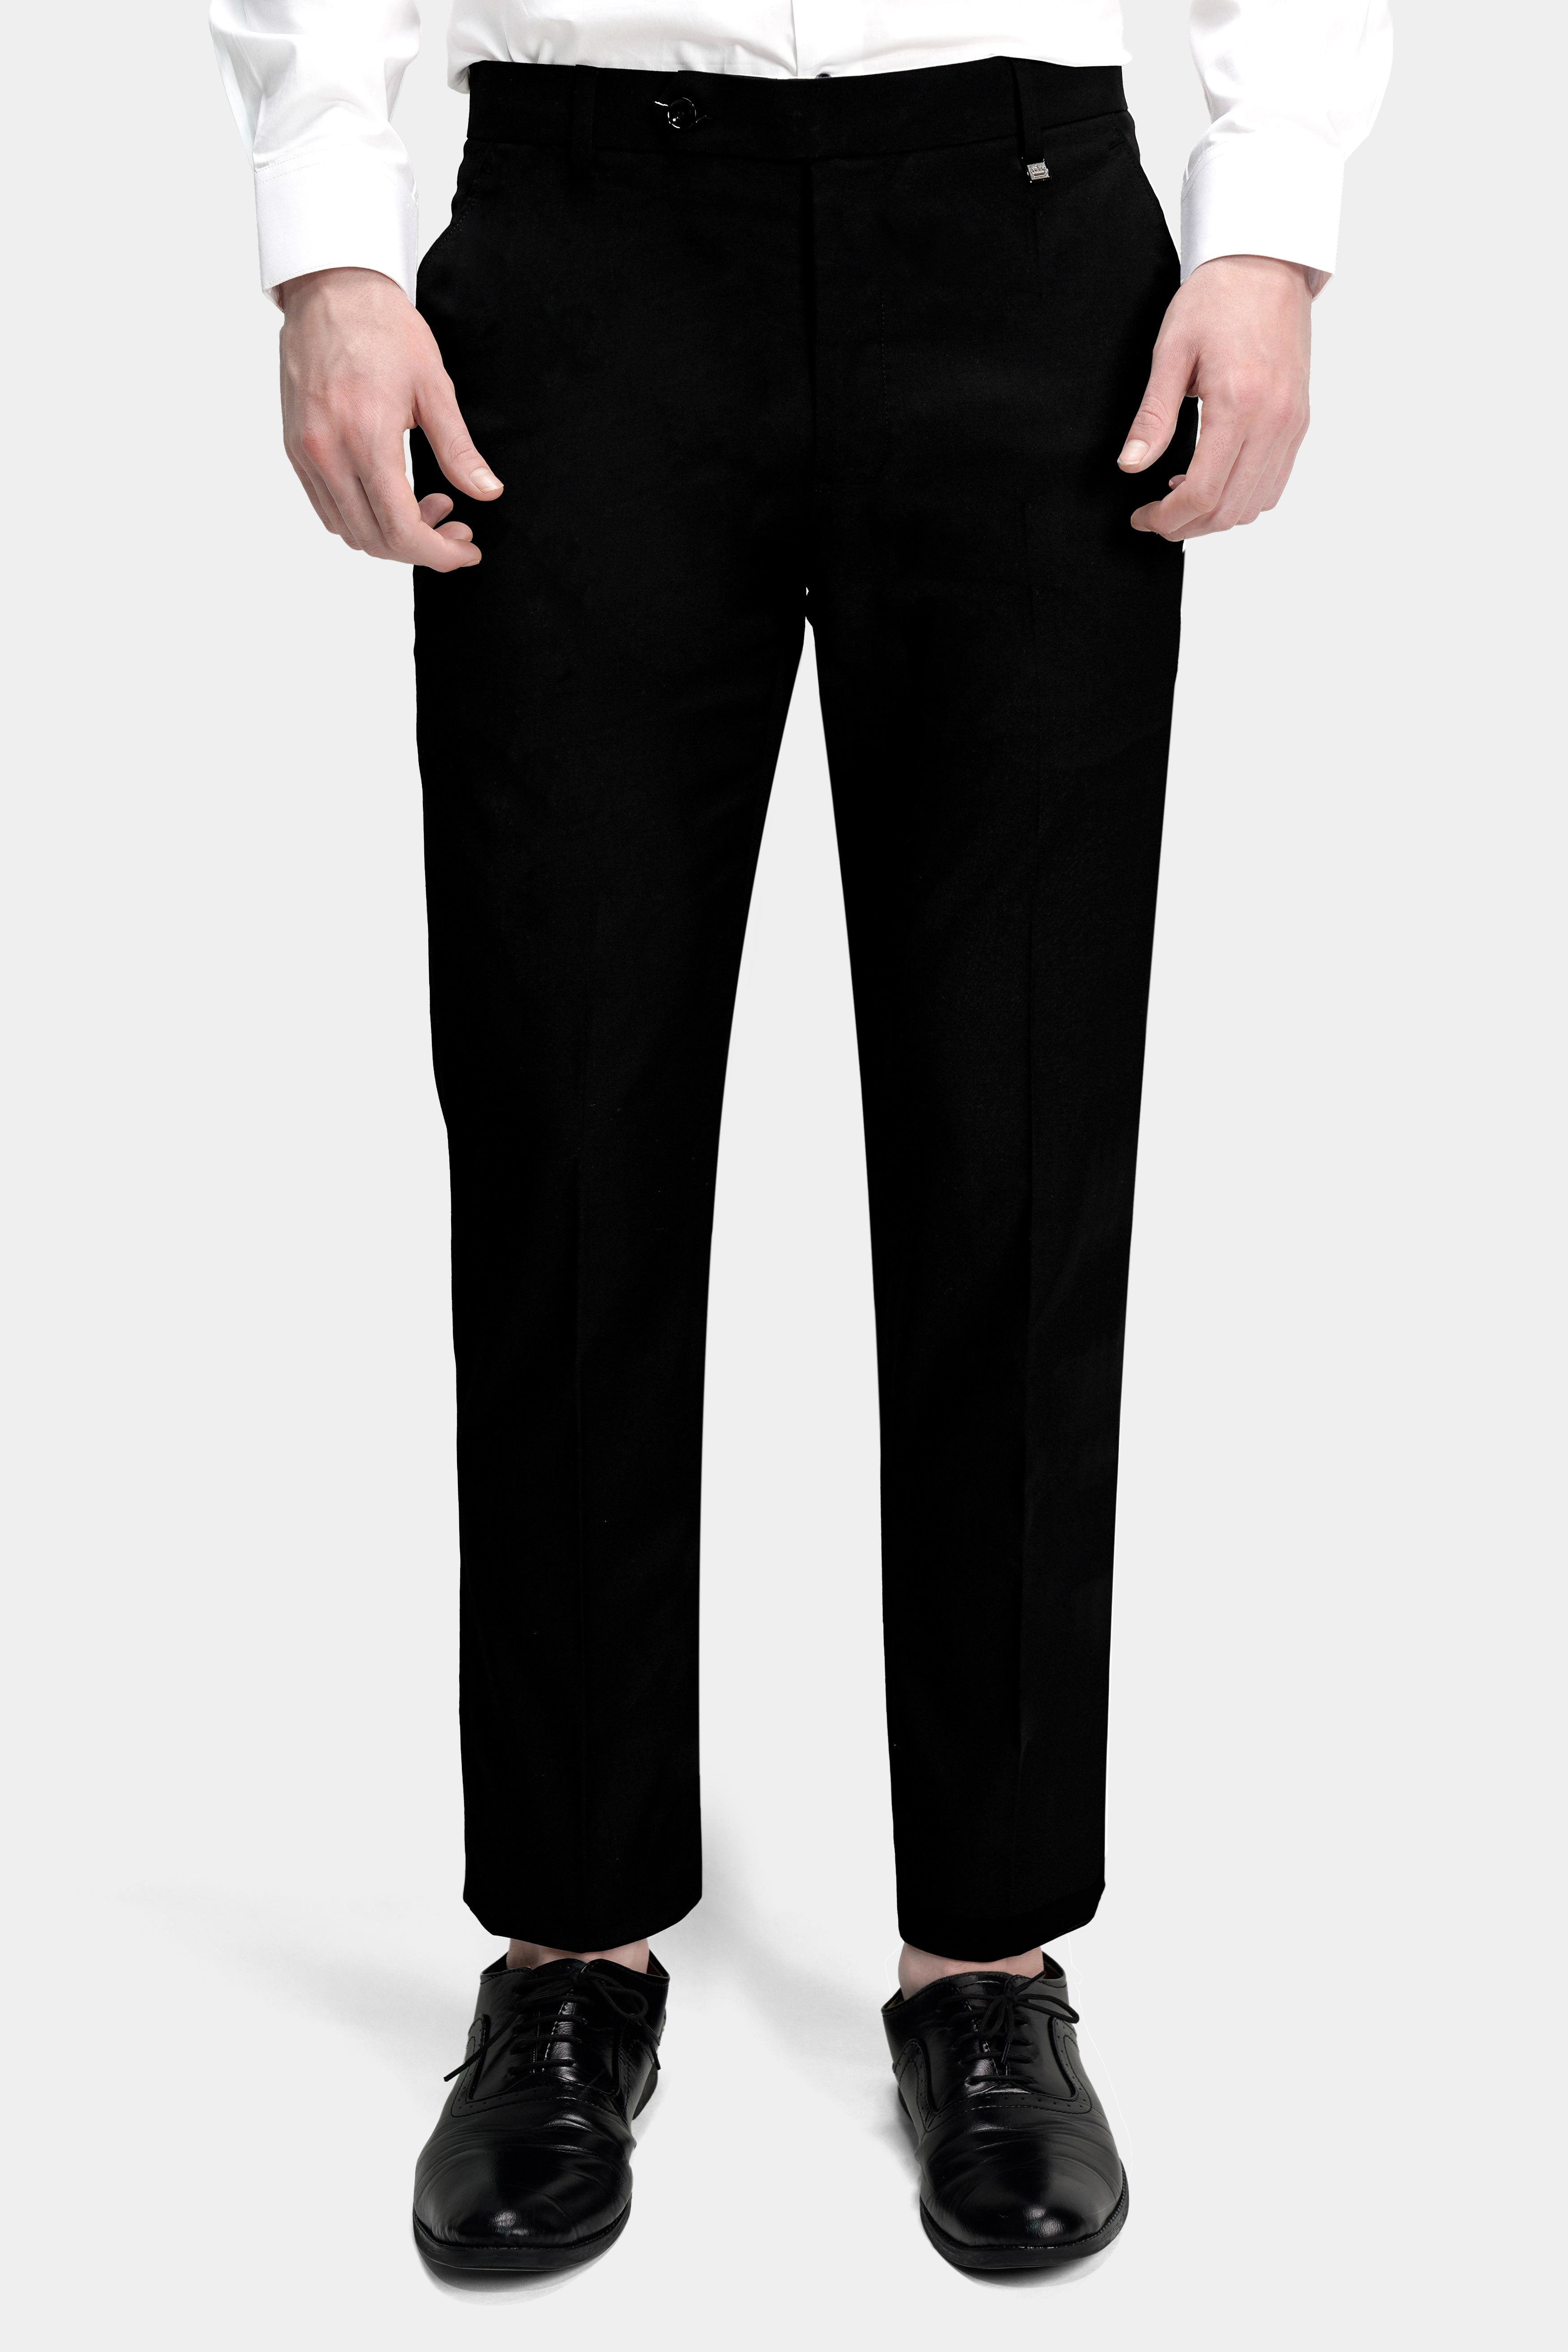 U.S. POLO ASSN. Regular Fit Men Brown Trousers - Buy U.S. POLO ASSN.  Regular Fit Men Brown Trousers Online at Best Prices in India | Flipkart.com